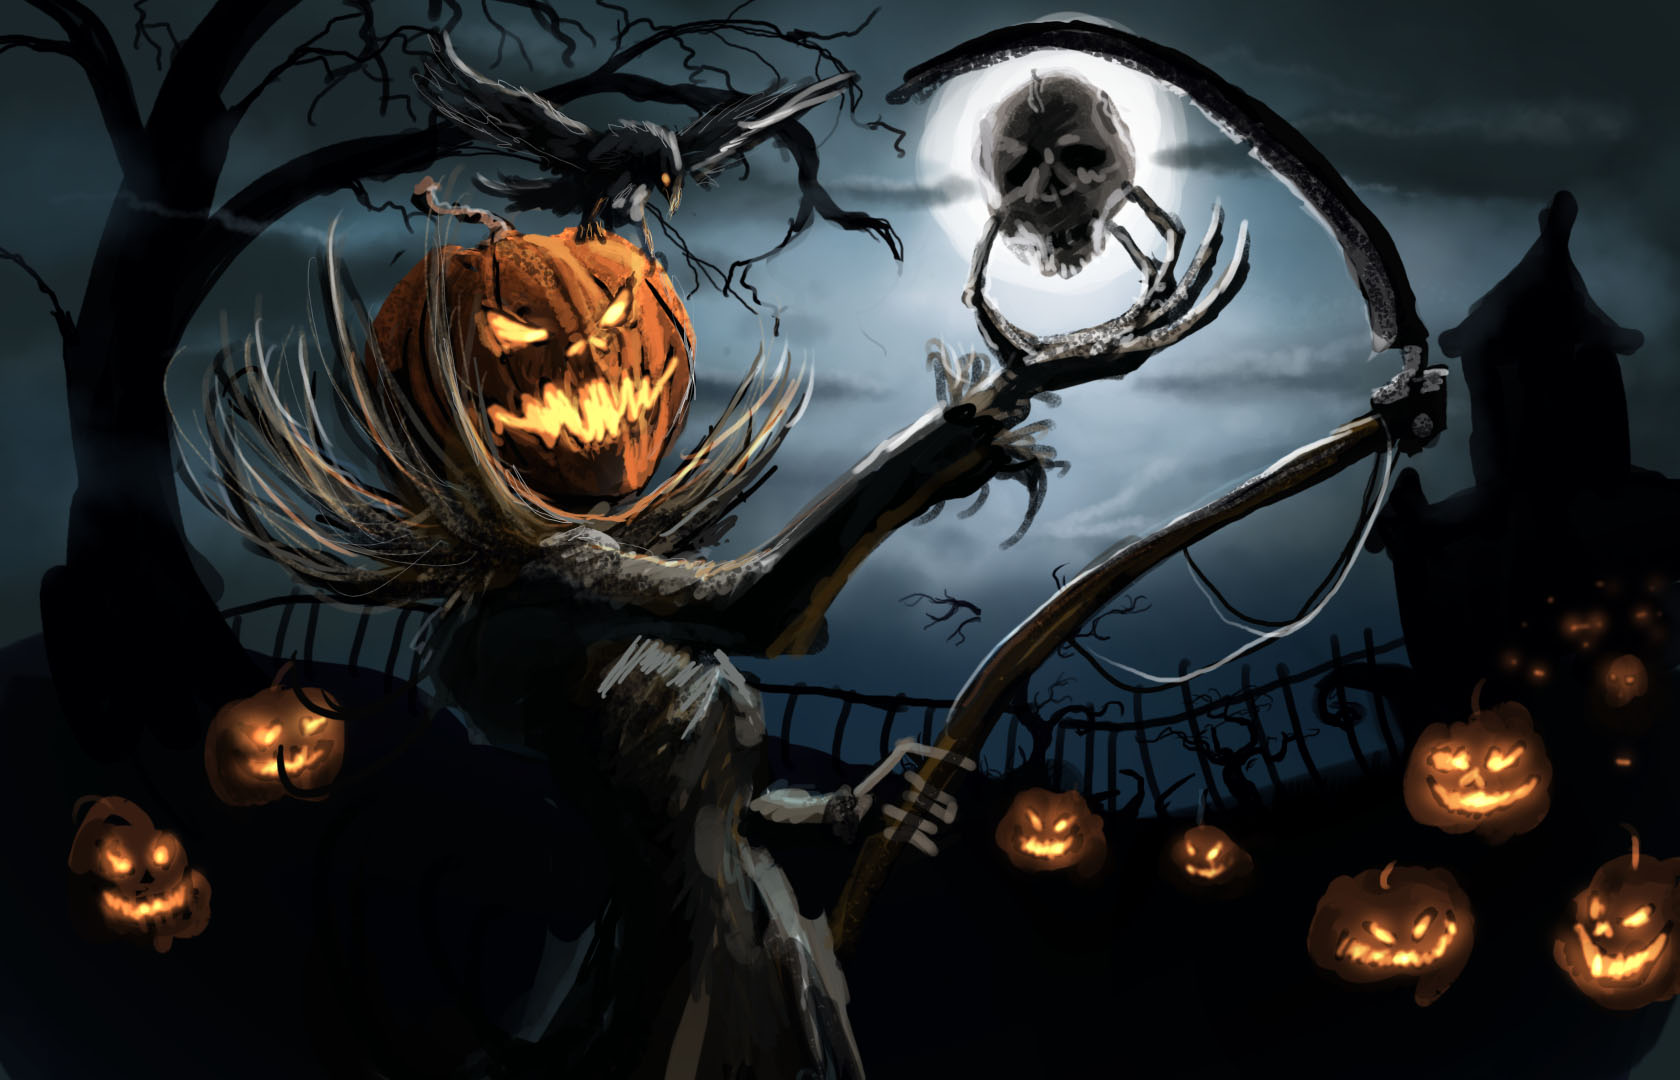 Free Halloween 2013 Backgrounds Wallpapers 1680x1080